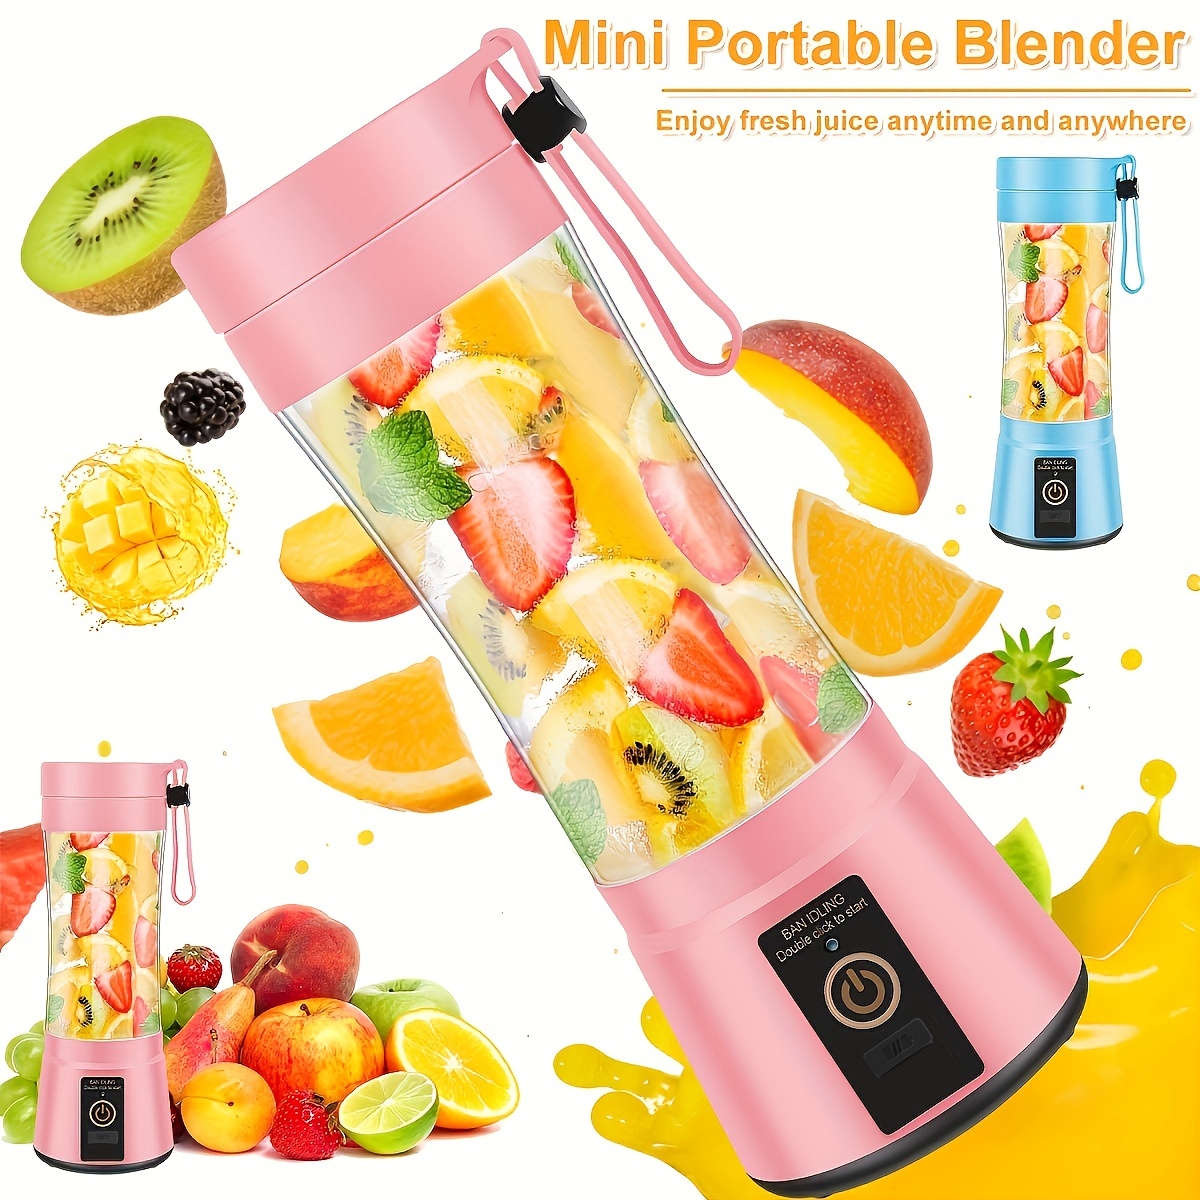 Personal Compact Bullet Blender with BPA-Free 400ml Short Blender Cup and 600ml Tall Cup, Portable Blender for Shakes and Smoothies, Mini Blender